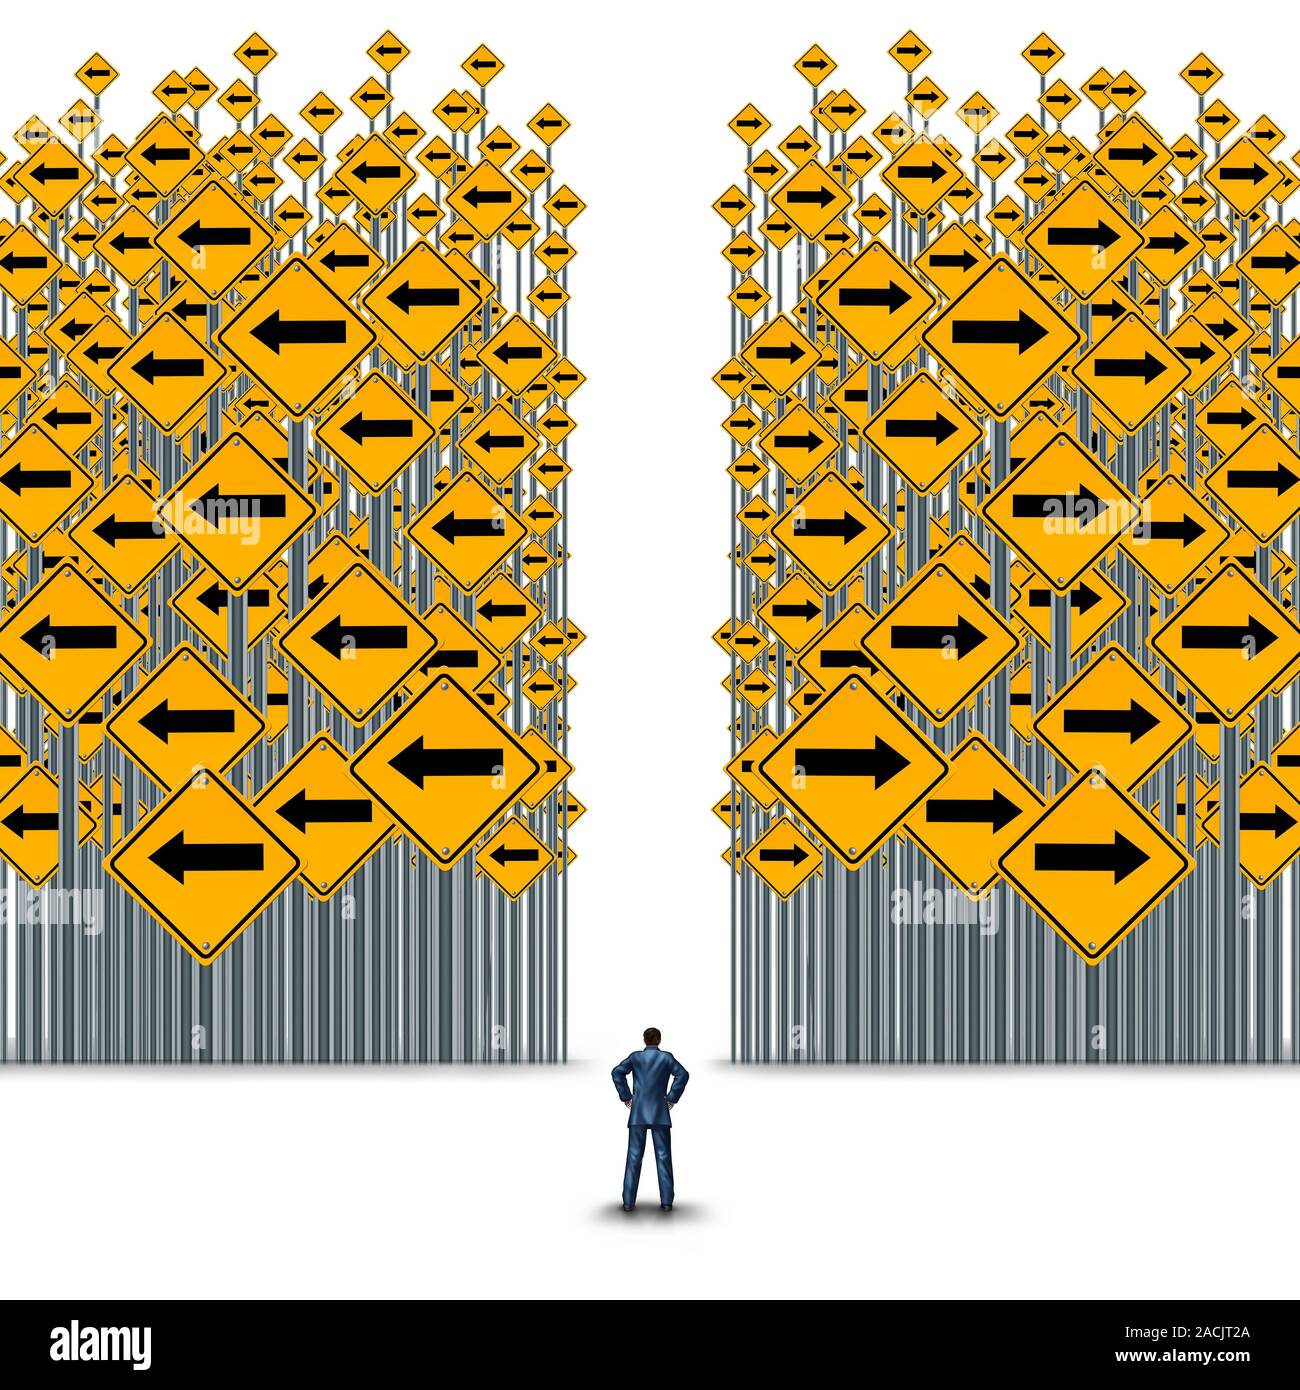 Business decisions or career path concept or corporate cross road metaphor for choosing a strategy or path with 3D illustration elements. Stock Photo